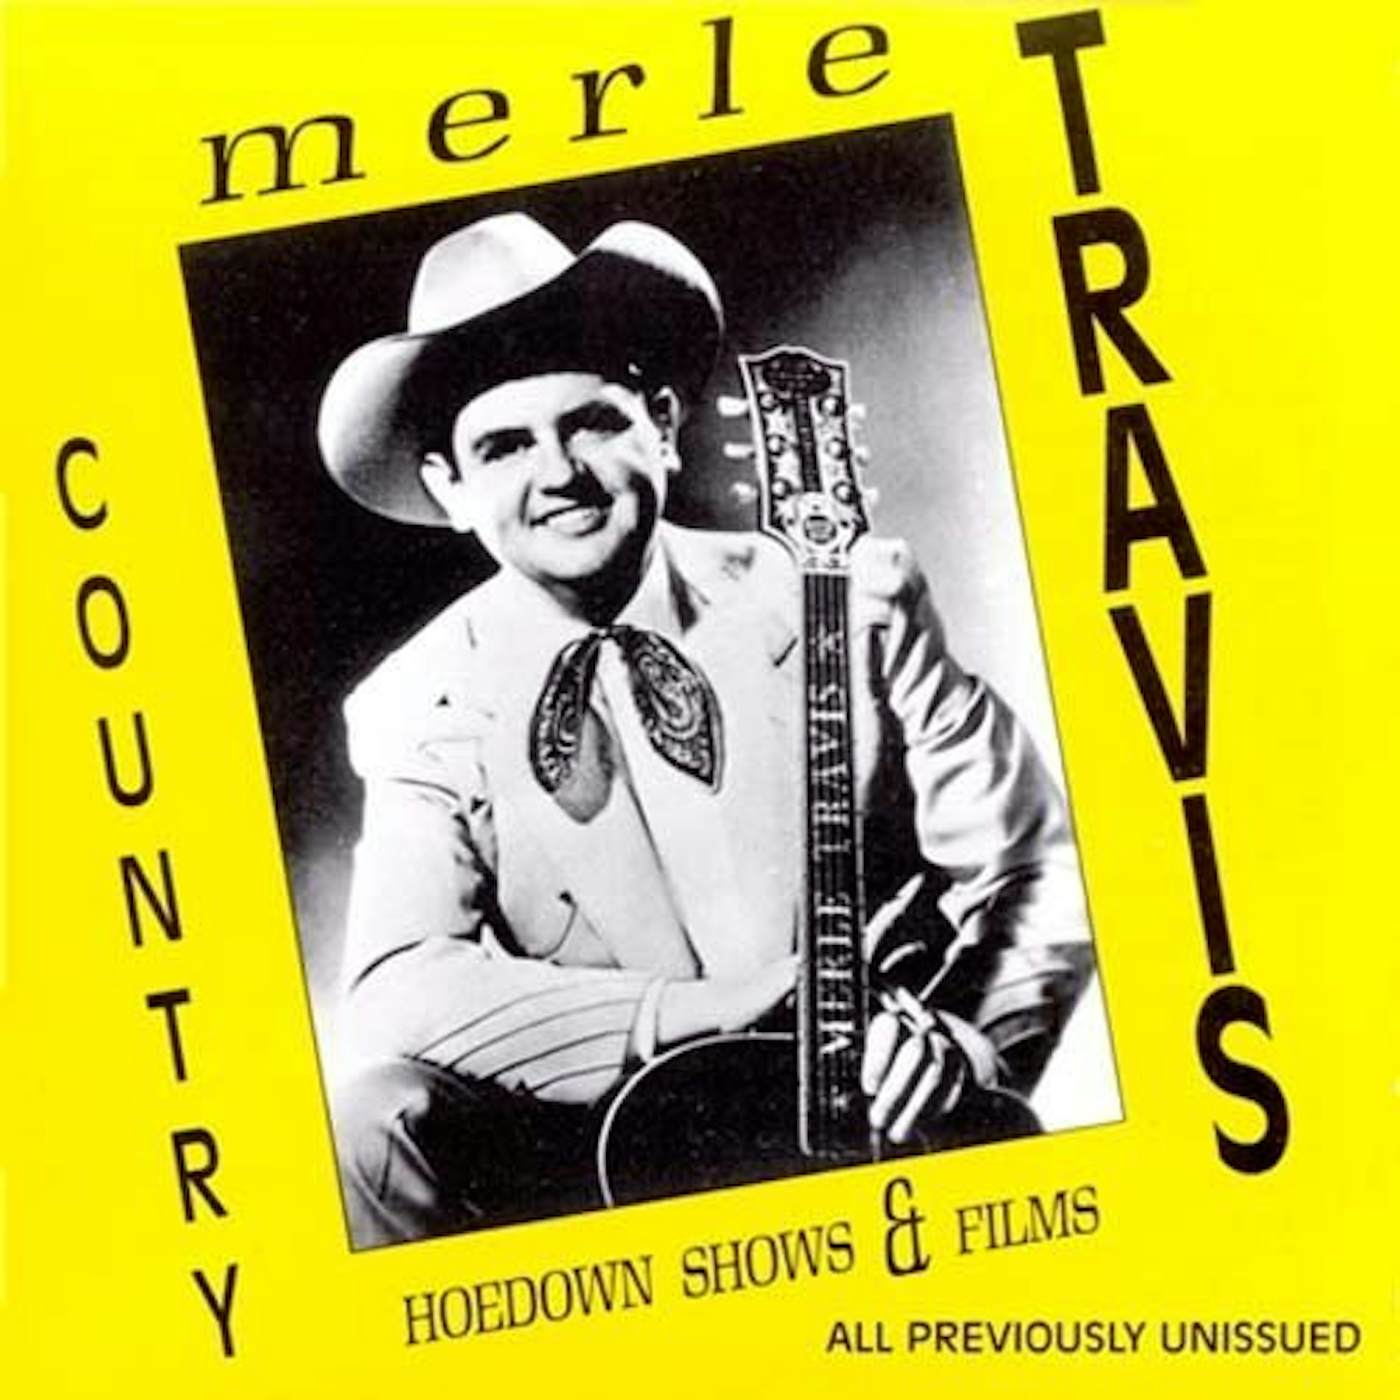 Merle Travis COUNTRY HOEDAWN SHOWS CD